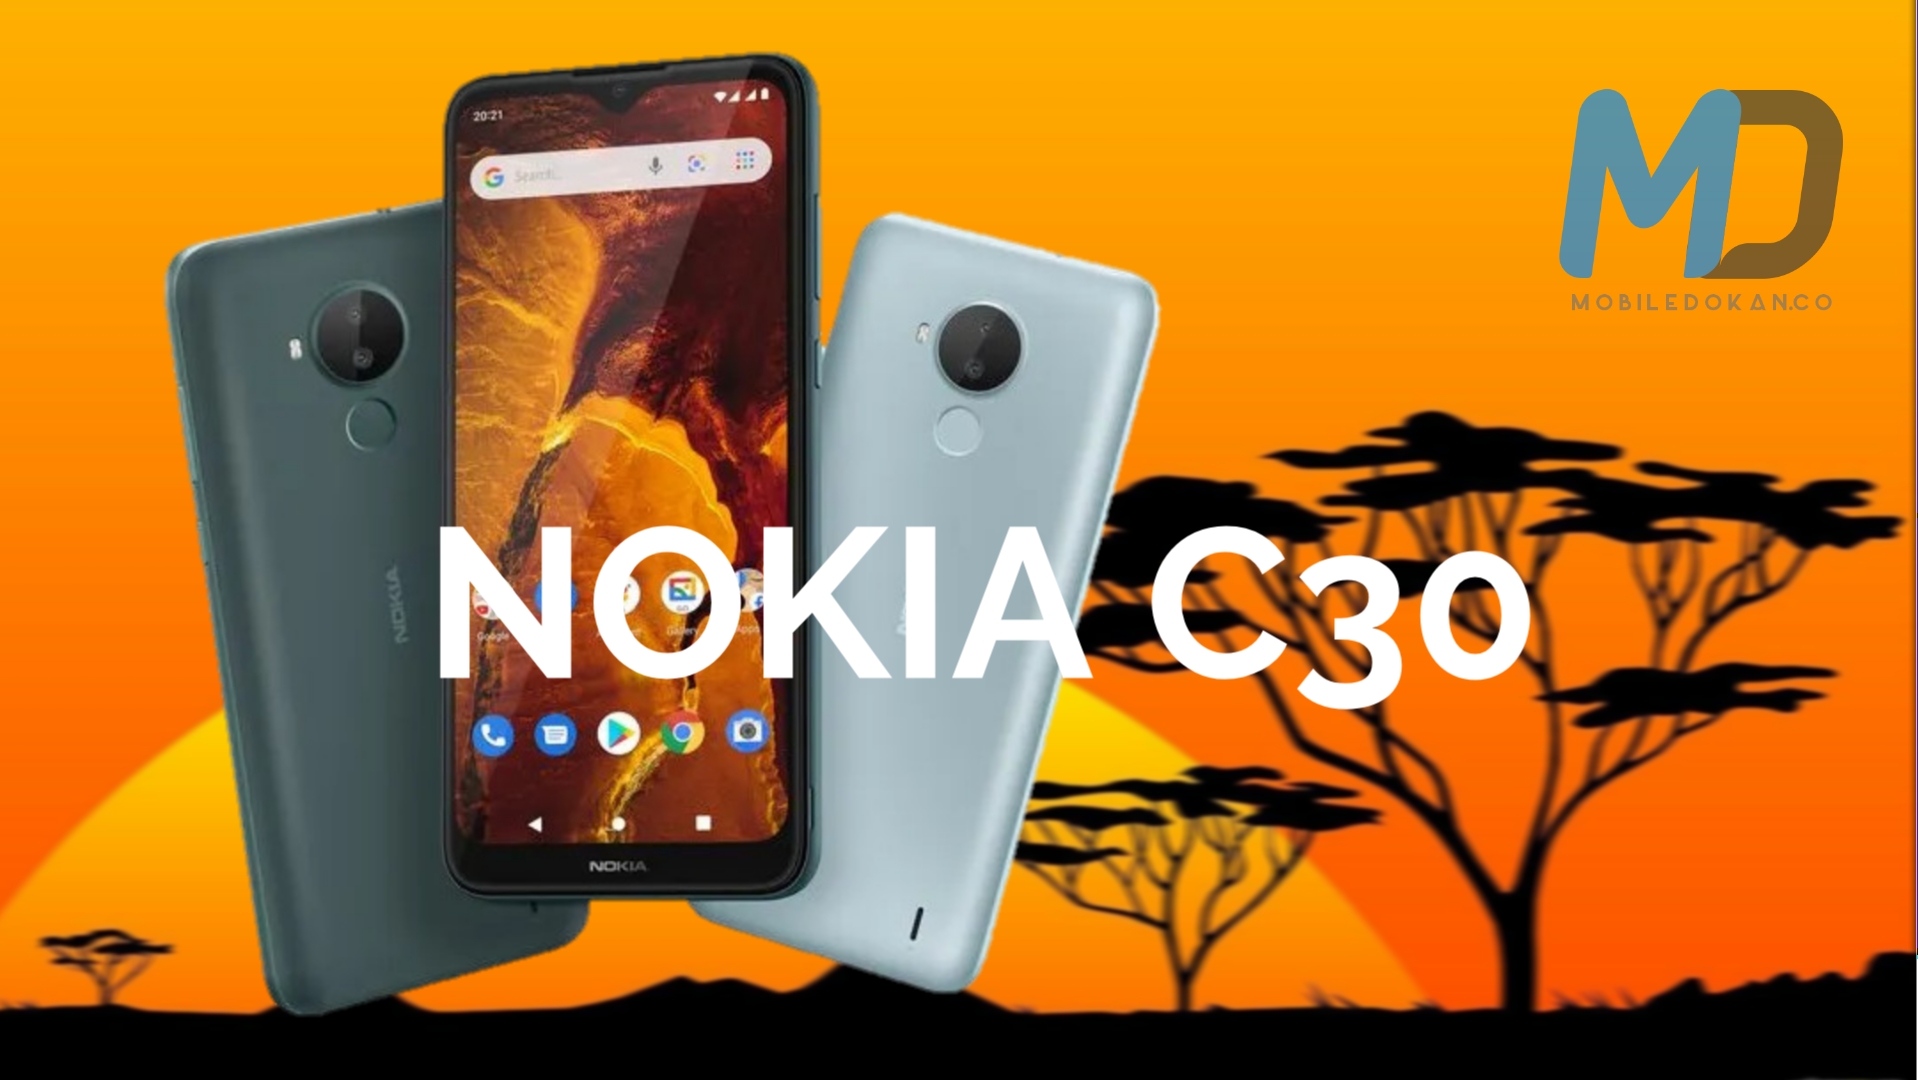 Nokia C30 entry-level smartphone running Android 11 Go Edition officially launched